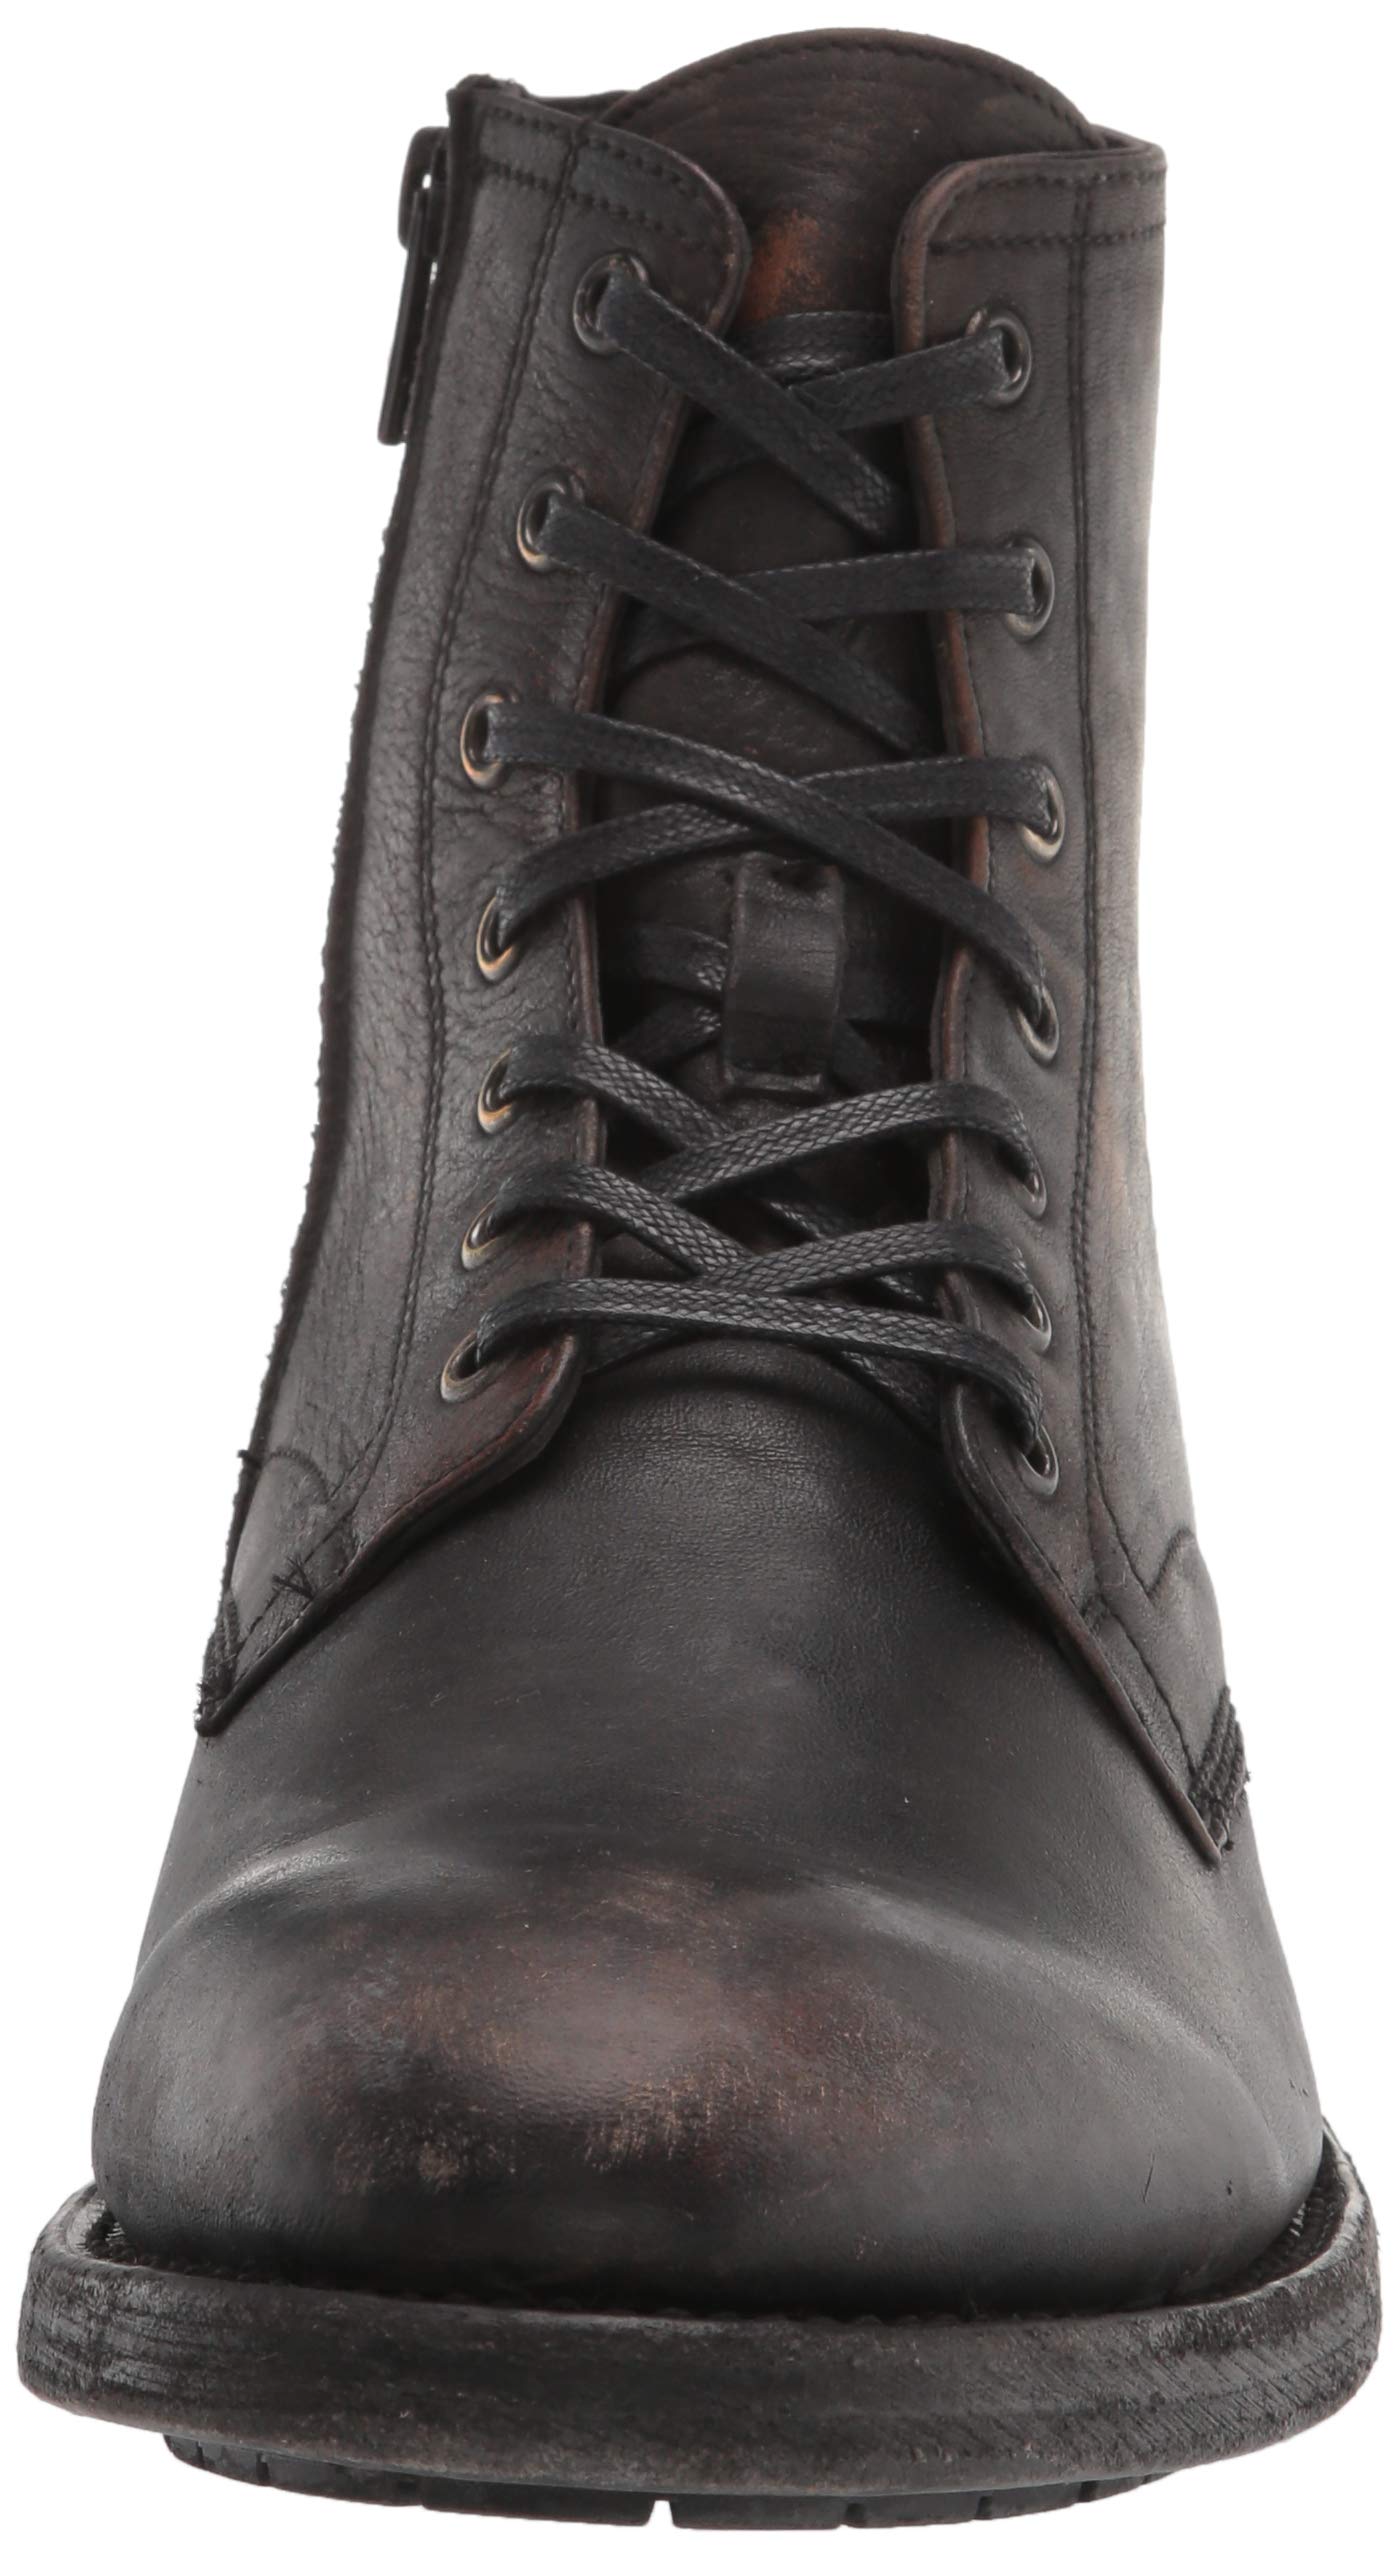  Frye Bowery Lace Up Vintage-Style 6 ¼” Leather Boots for Men  Made from Pull Up Leather with Antique Brass Hardware, Goodyear Welt  Construction, and Zipper Closure, Cognac - 8M